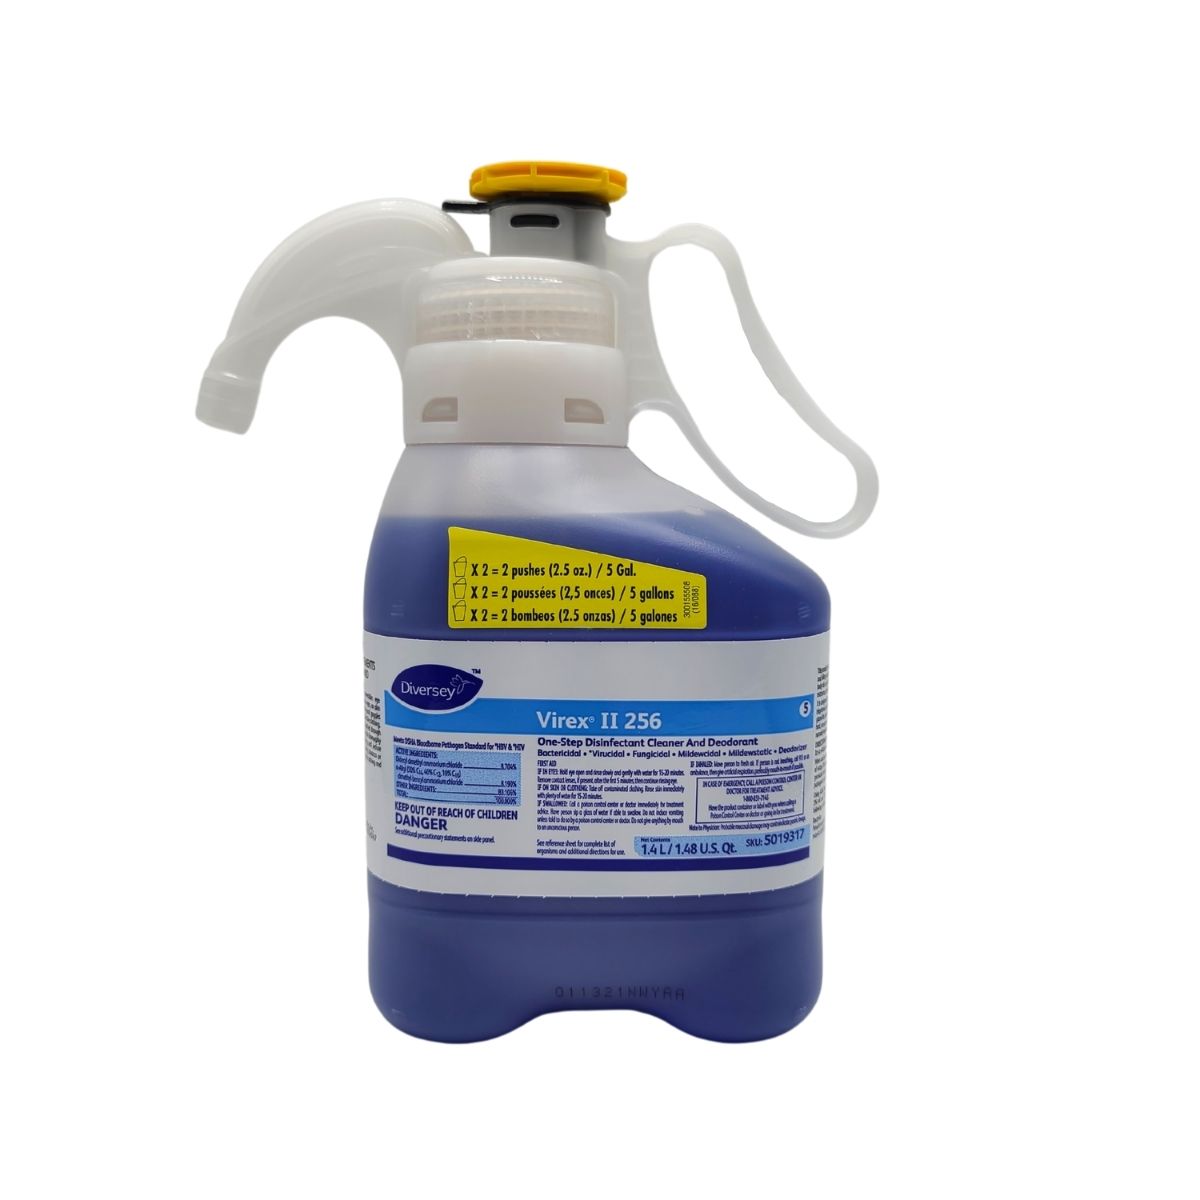 Virex II 256 Disinfectant for Diversey SmartDose, Minty Scent, 47.3oz.